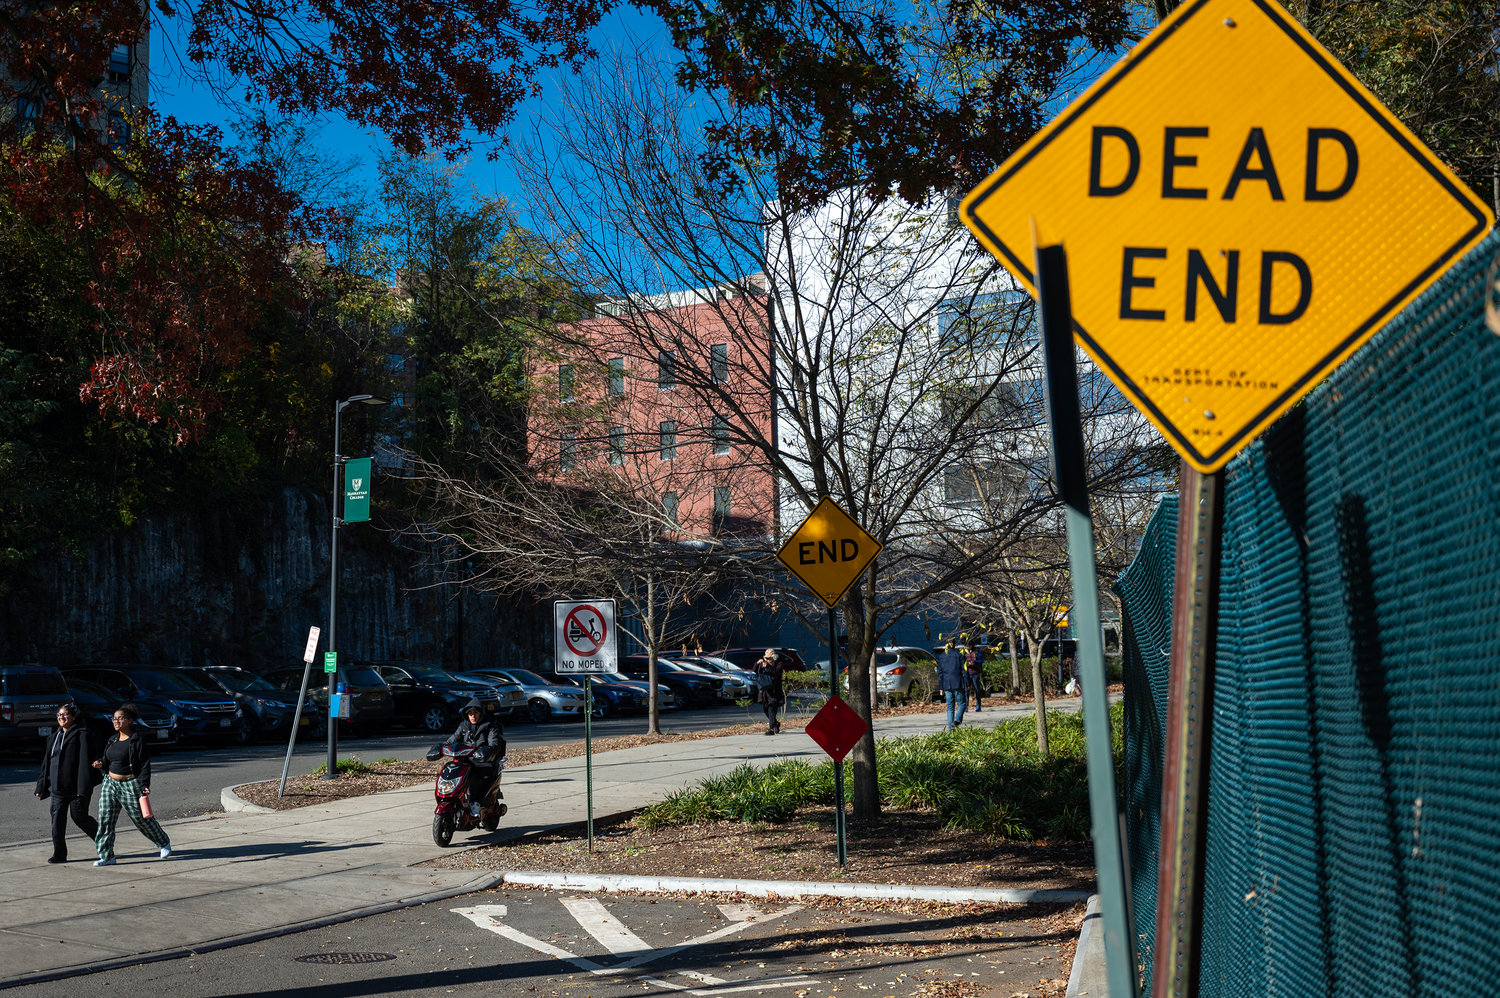 The signage on the pathway near Manhattan College now has signs that warn against moped usage and the end of the pathway’s access to mopeds.